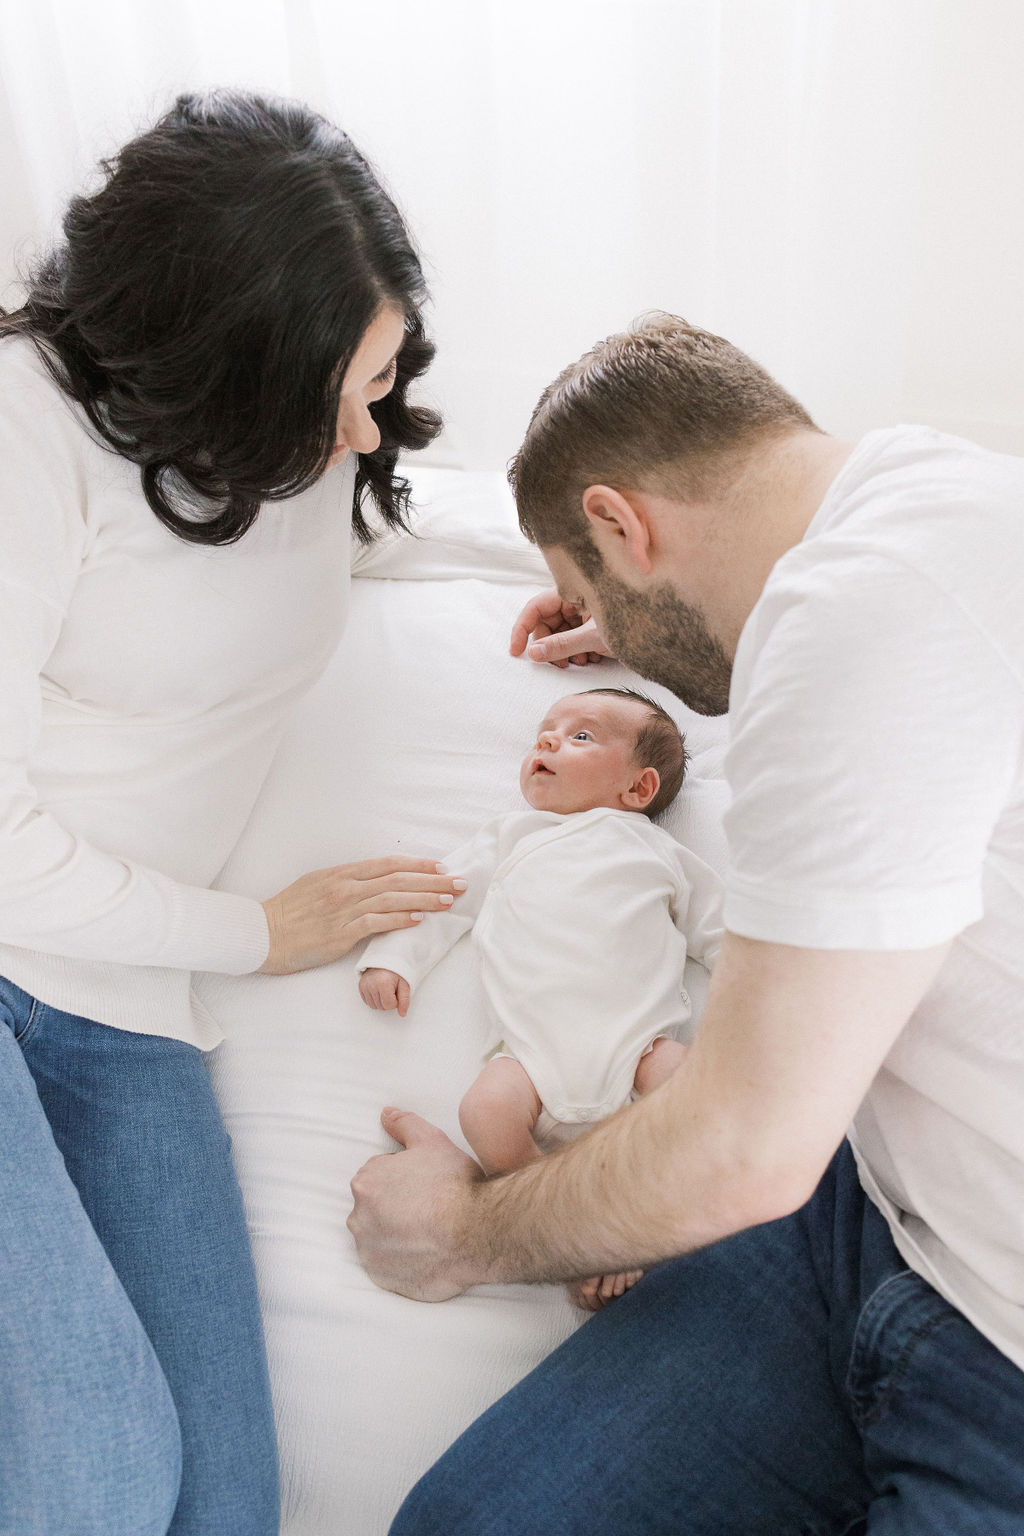 A mom and dad lay with their newborn baby on a bed in a studio in white shirts and jeans